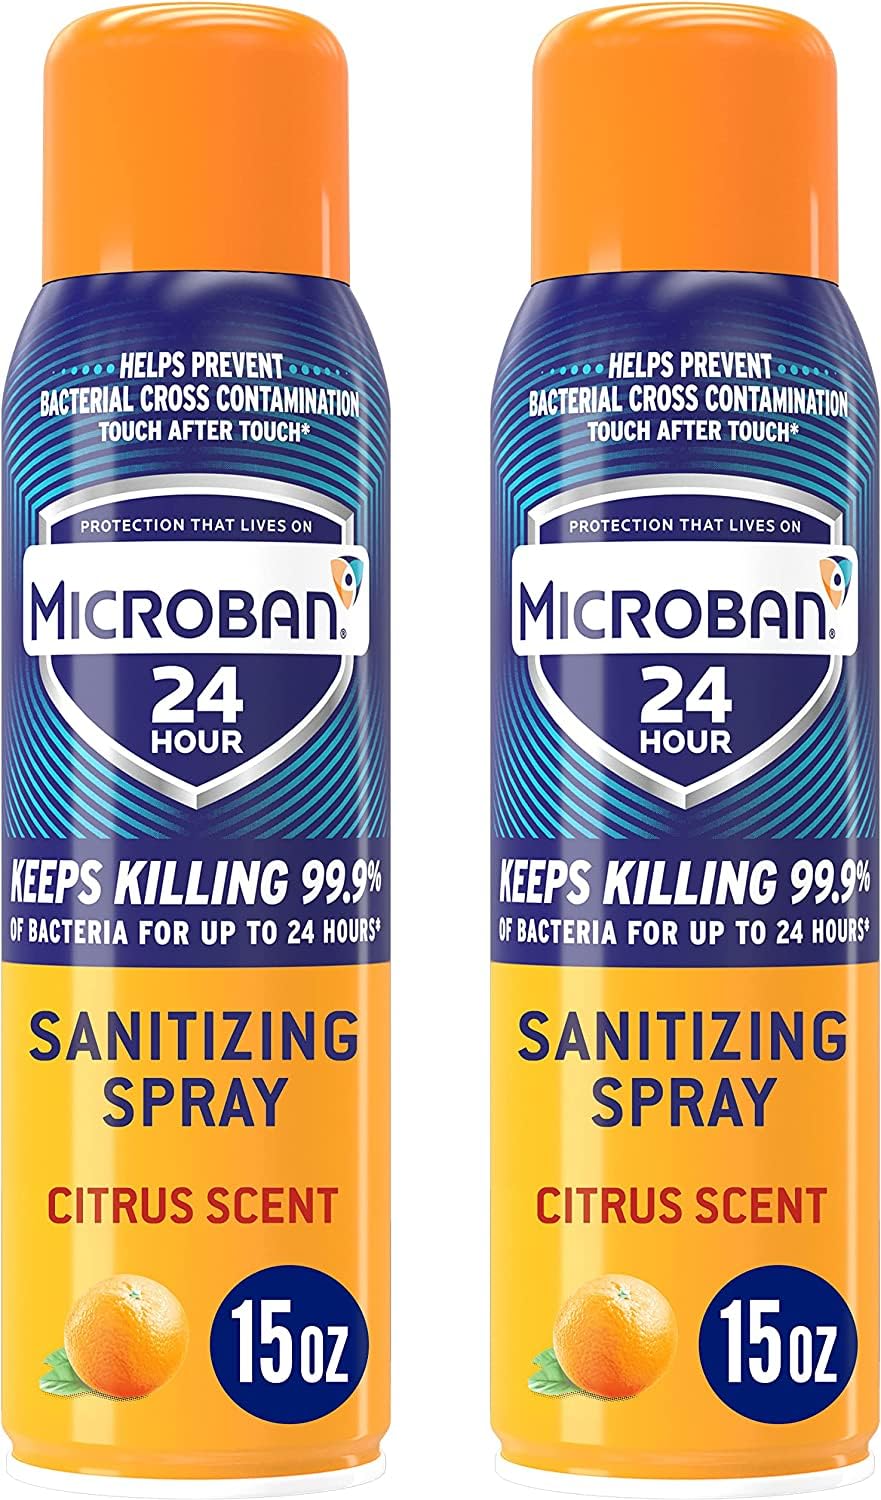 Microban Disinfectant Spray, 24 Hour Sanitizing and Antibacterial Sanitizing Spray, Citrus Scent, 2 Count (15oz Each) (Packaging May Vary) for $3.14